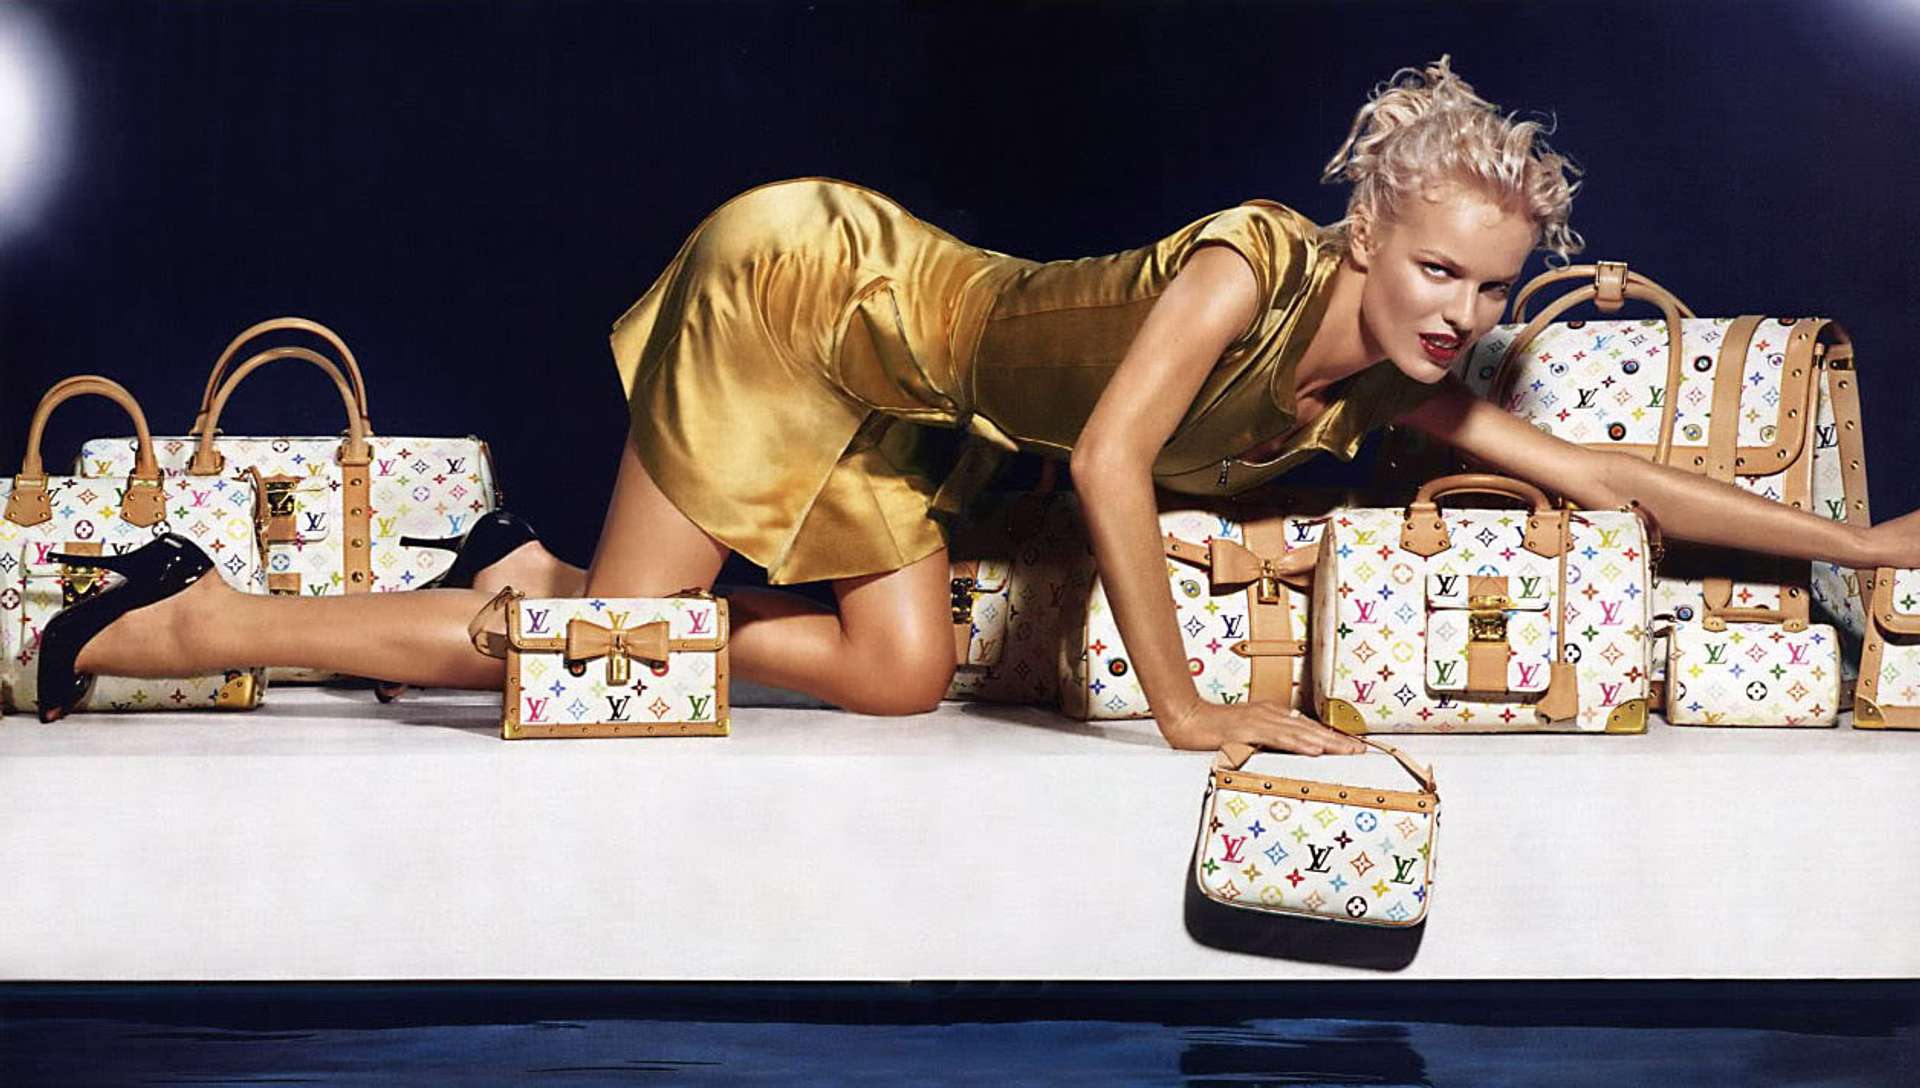 An image of a model crouching over a large number of Louis Vuitton bags and luggage, reimagined in Murakami’s colourful palette.